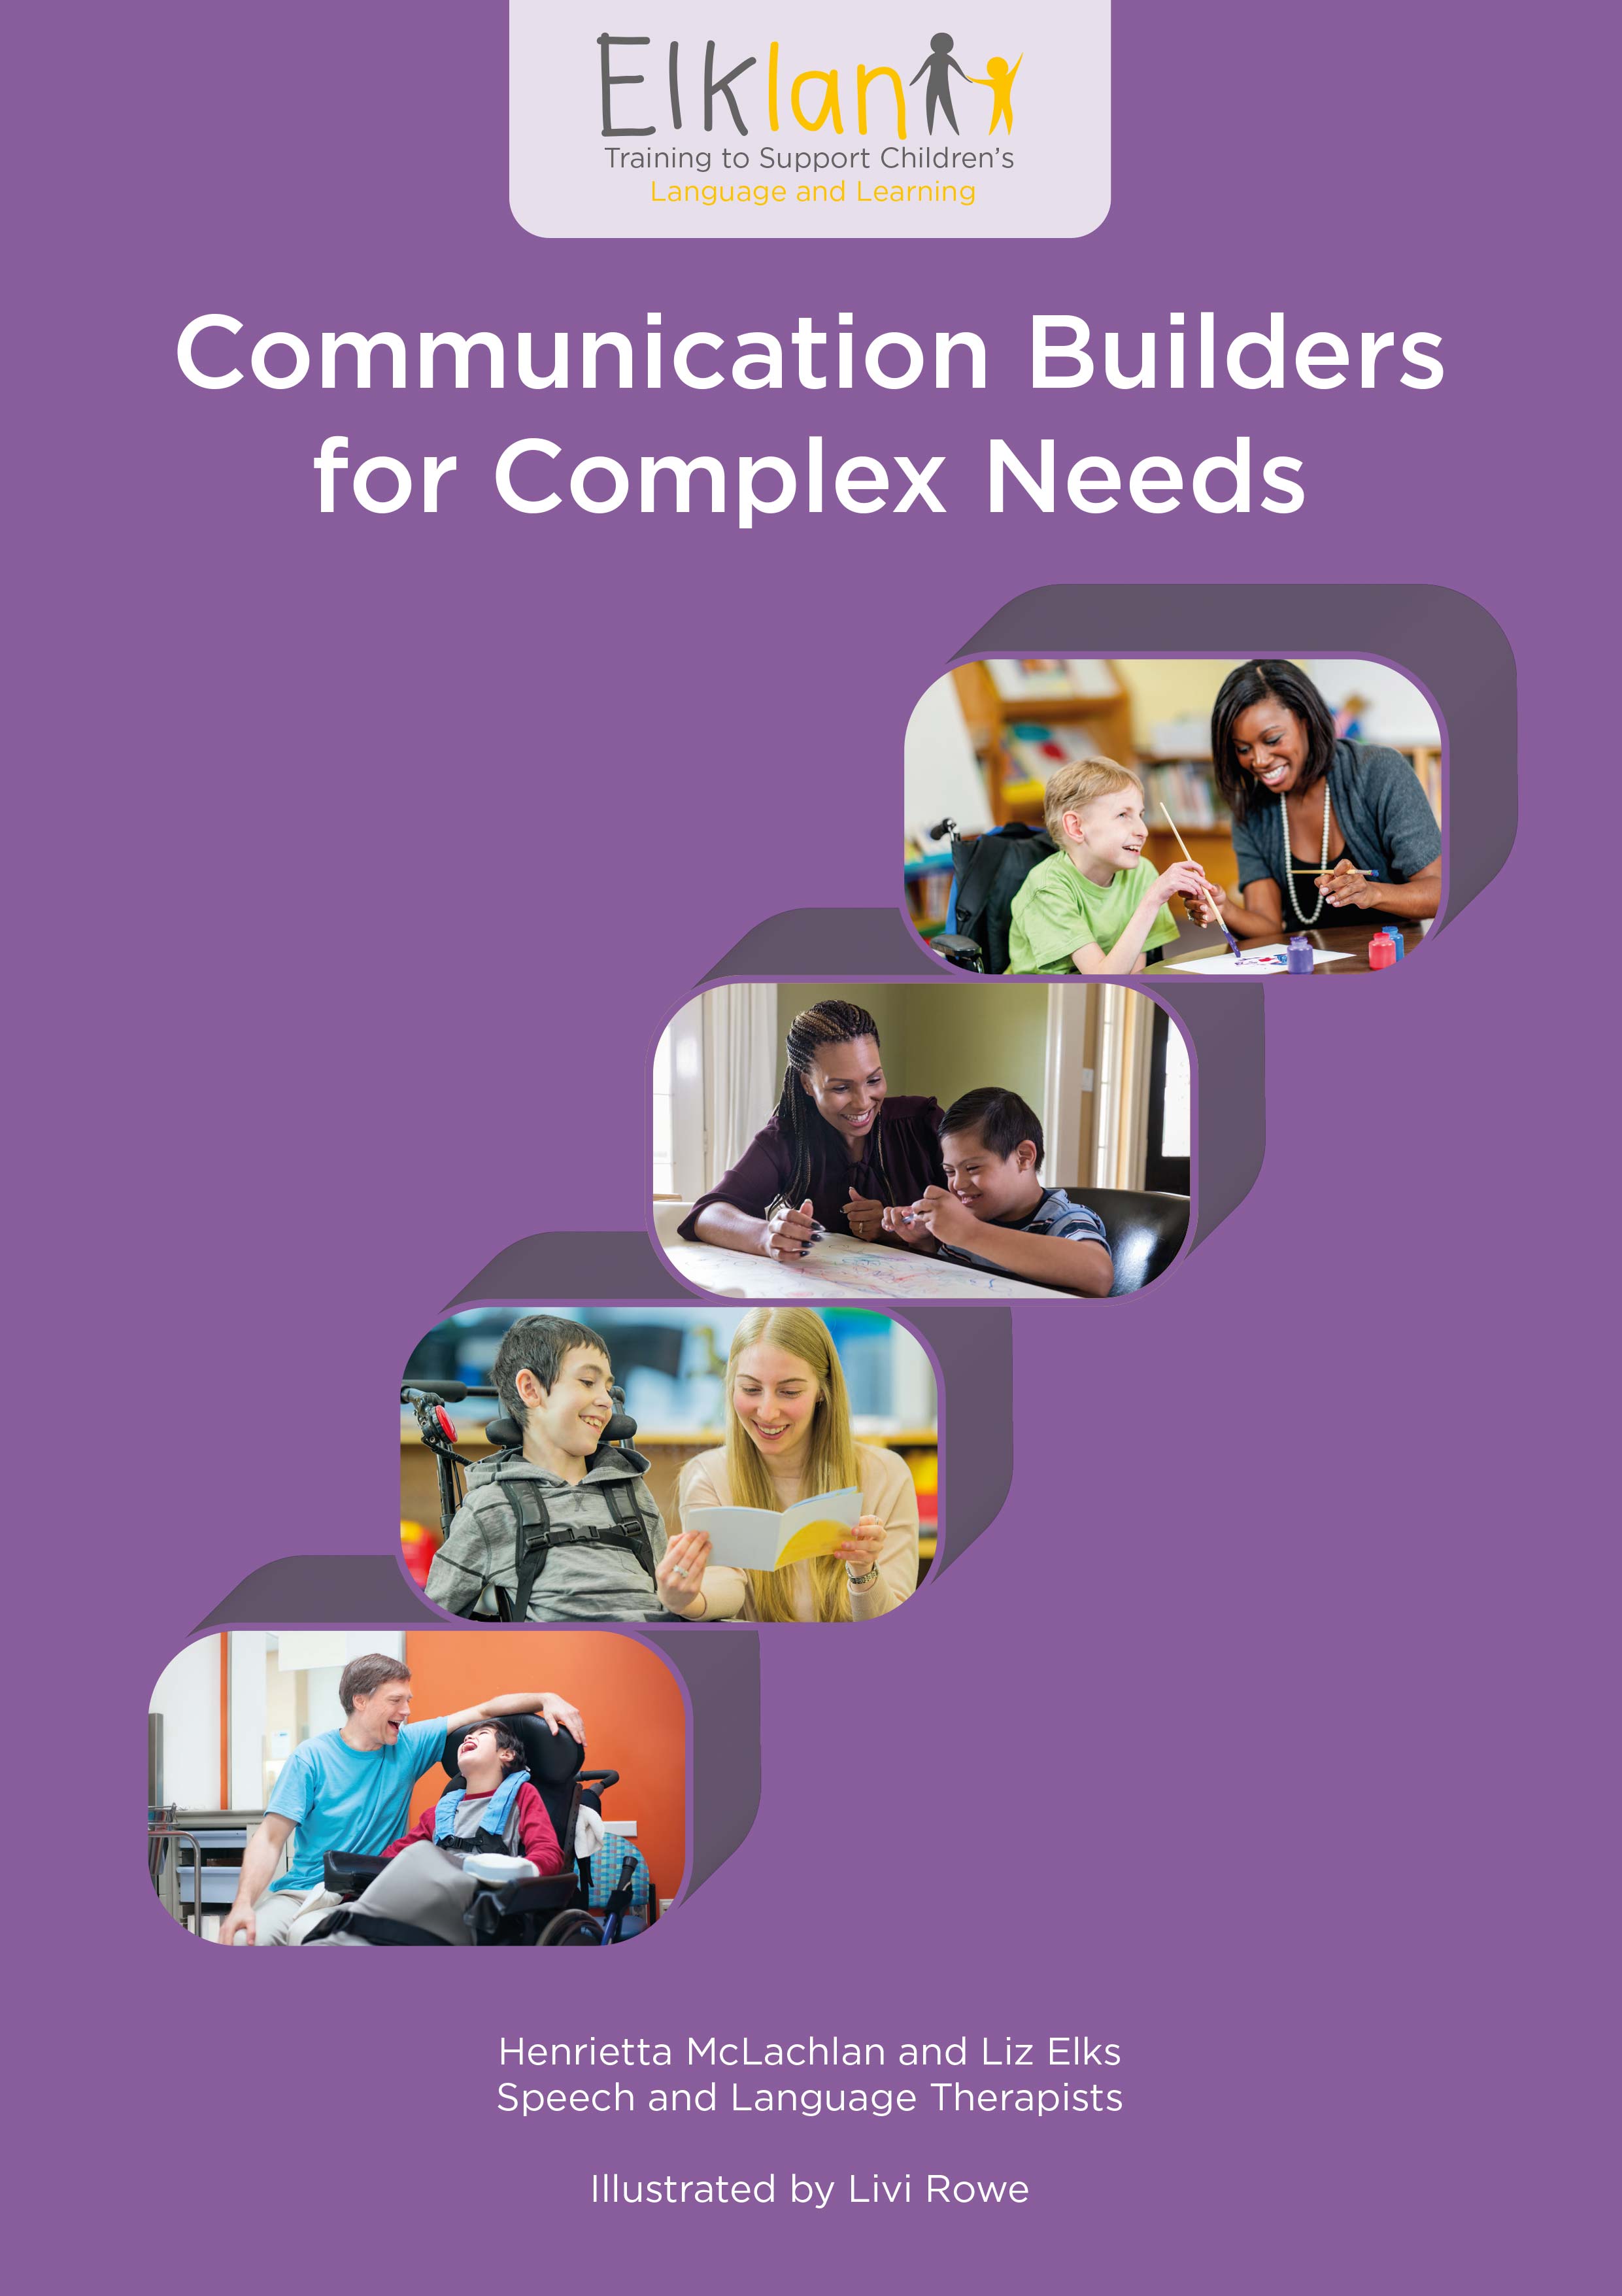 Communication Builders for Complex Needs e-book